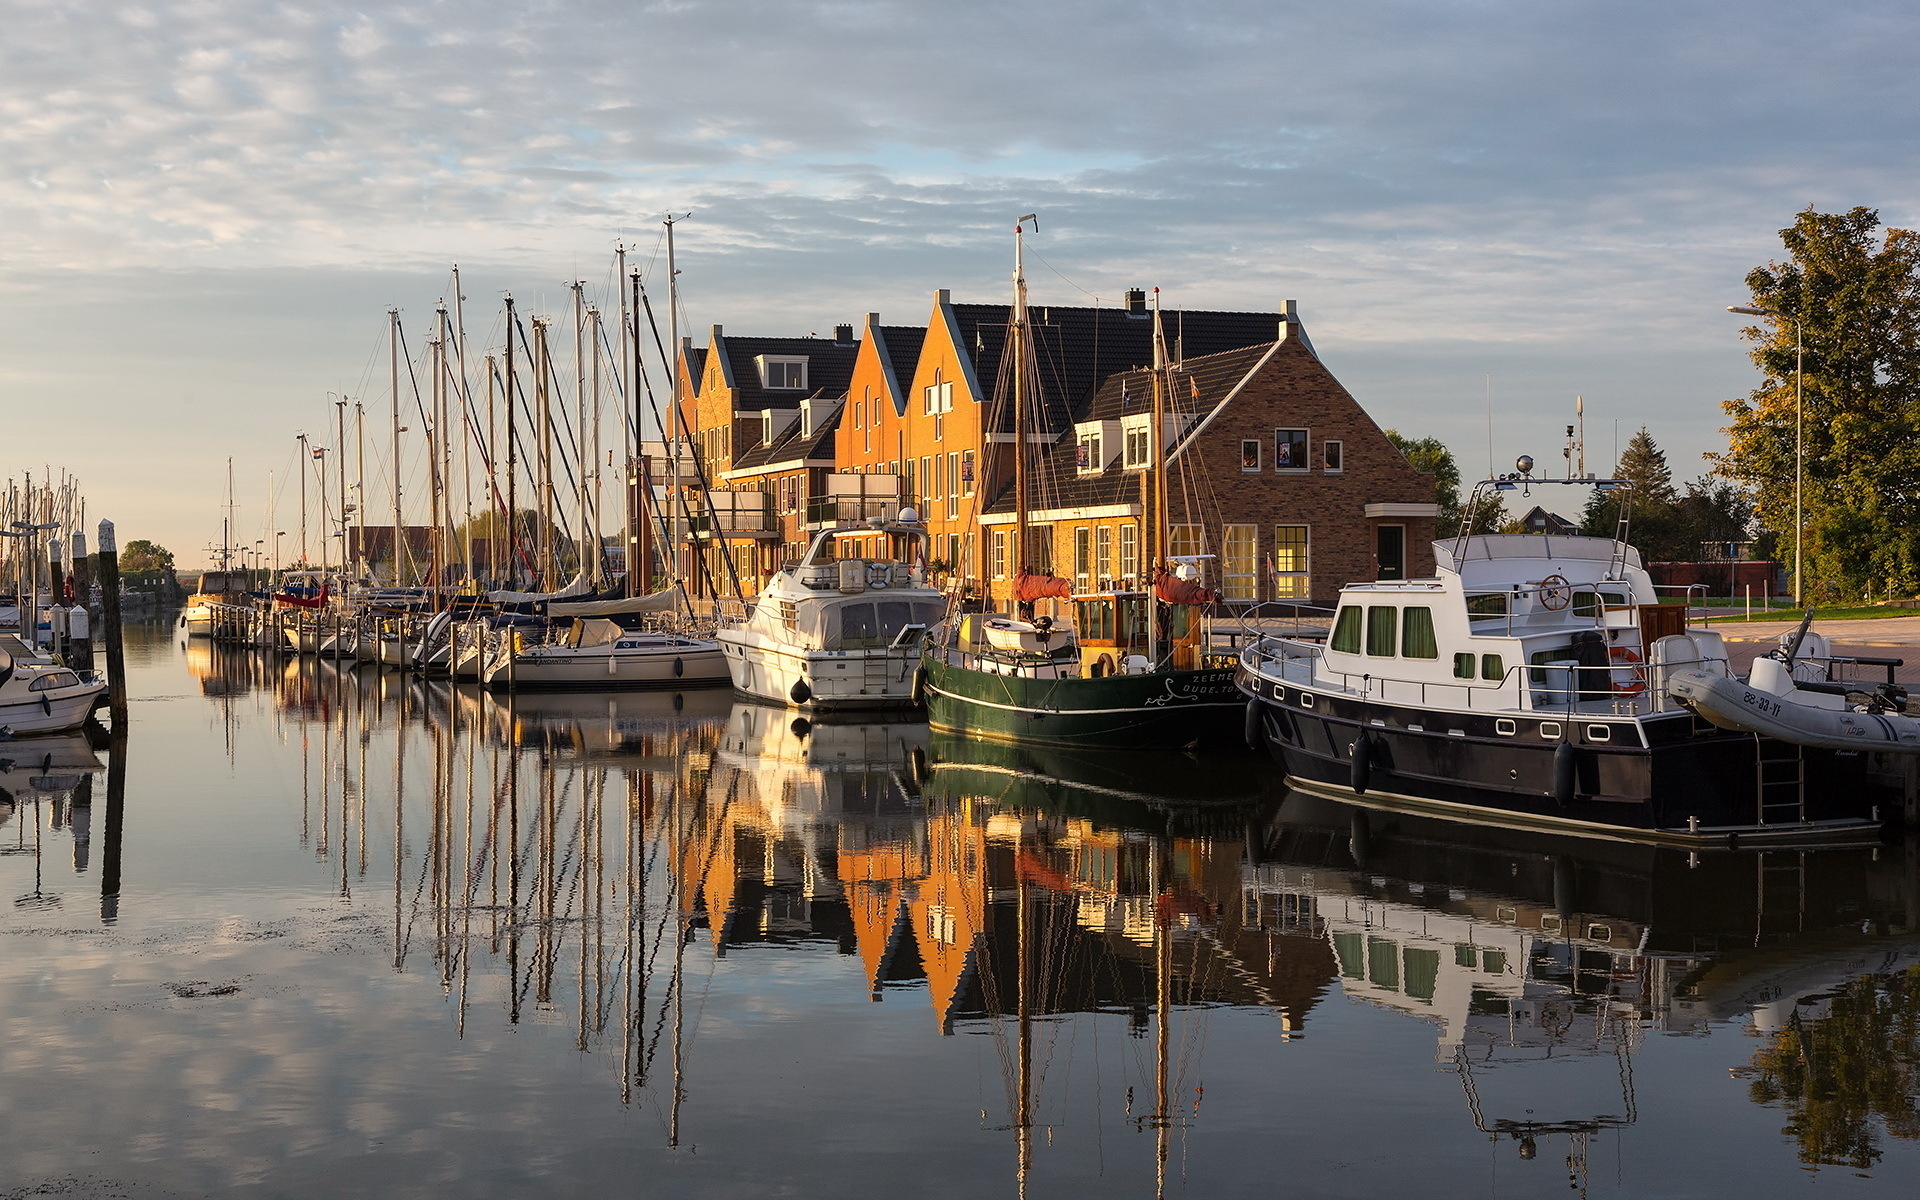 photography, reflection, boat, building, house, scenic, town, wharf High Definition image